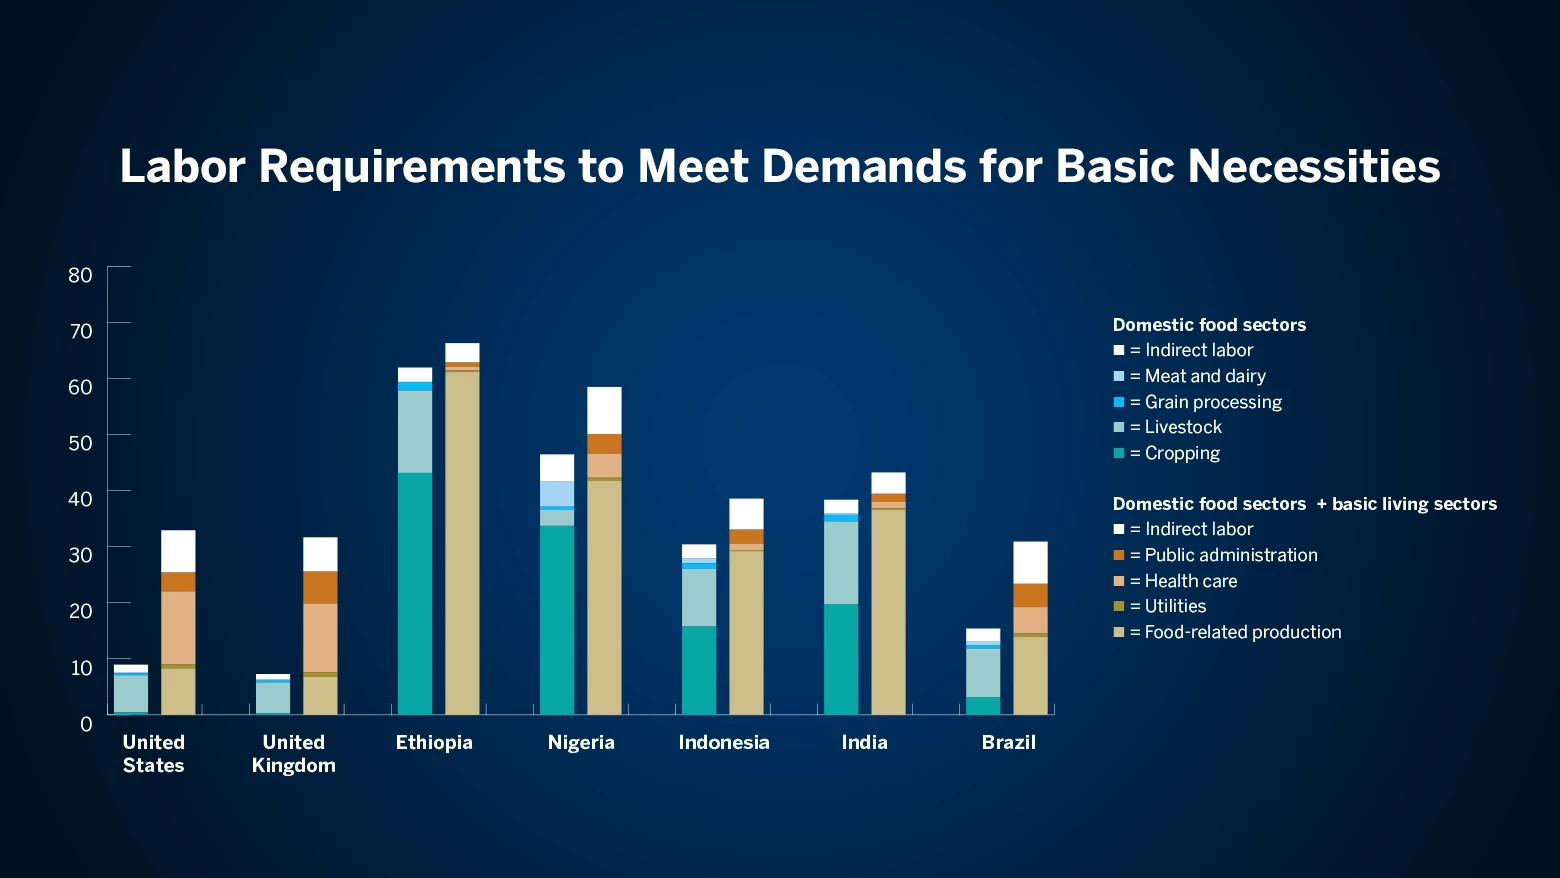 Labor requirements to meet demand for basic necessities chart